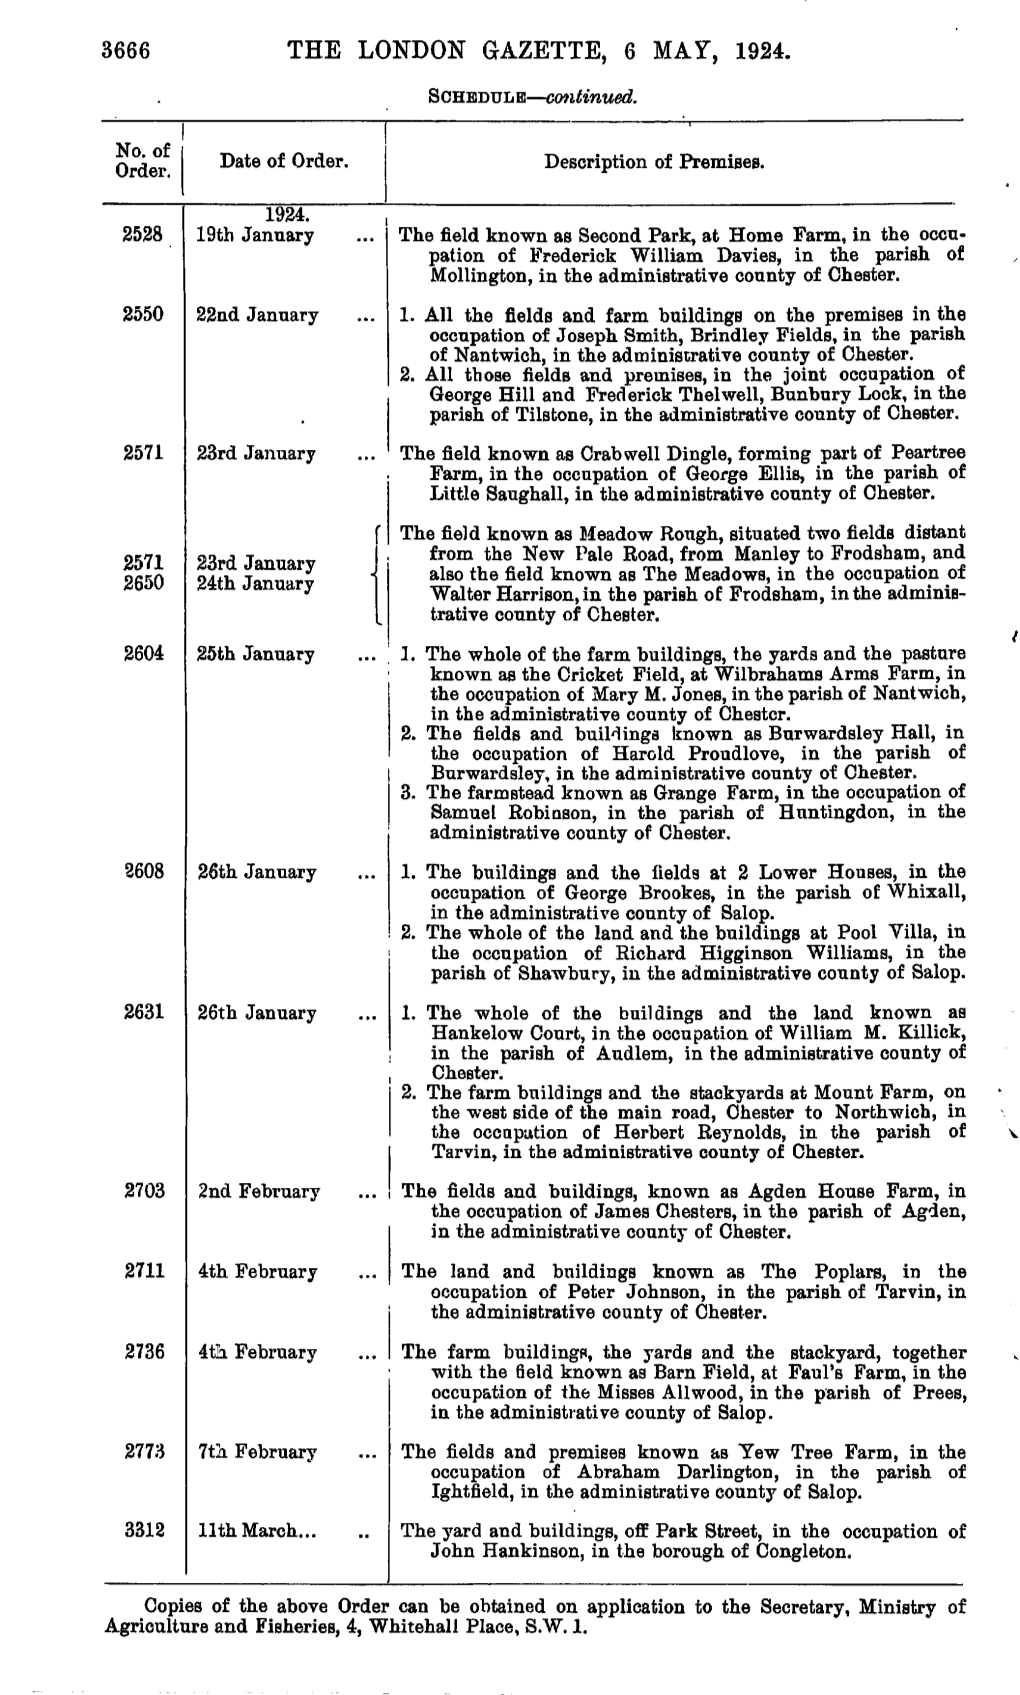 THE LONDON GAZETTE, 6 MAY, 1924. SCHEDULE—Continued